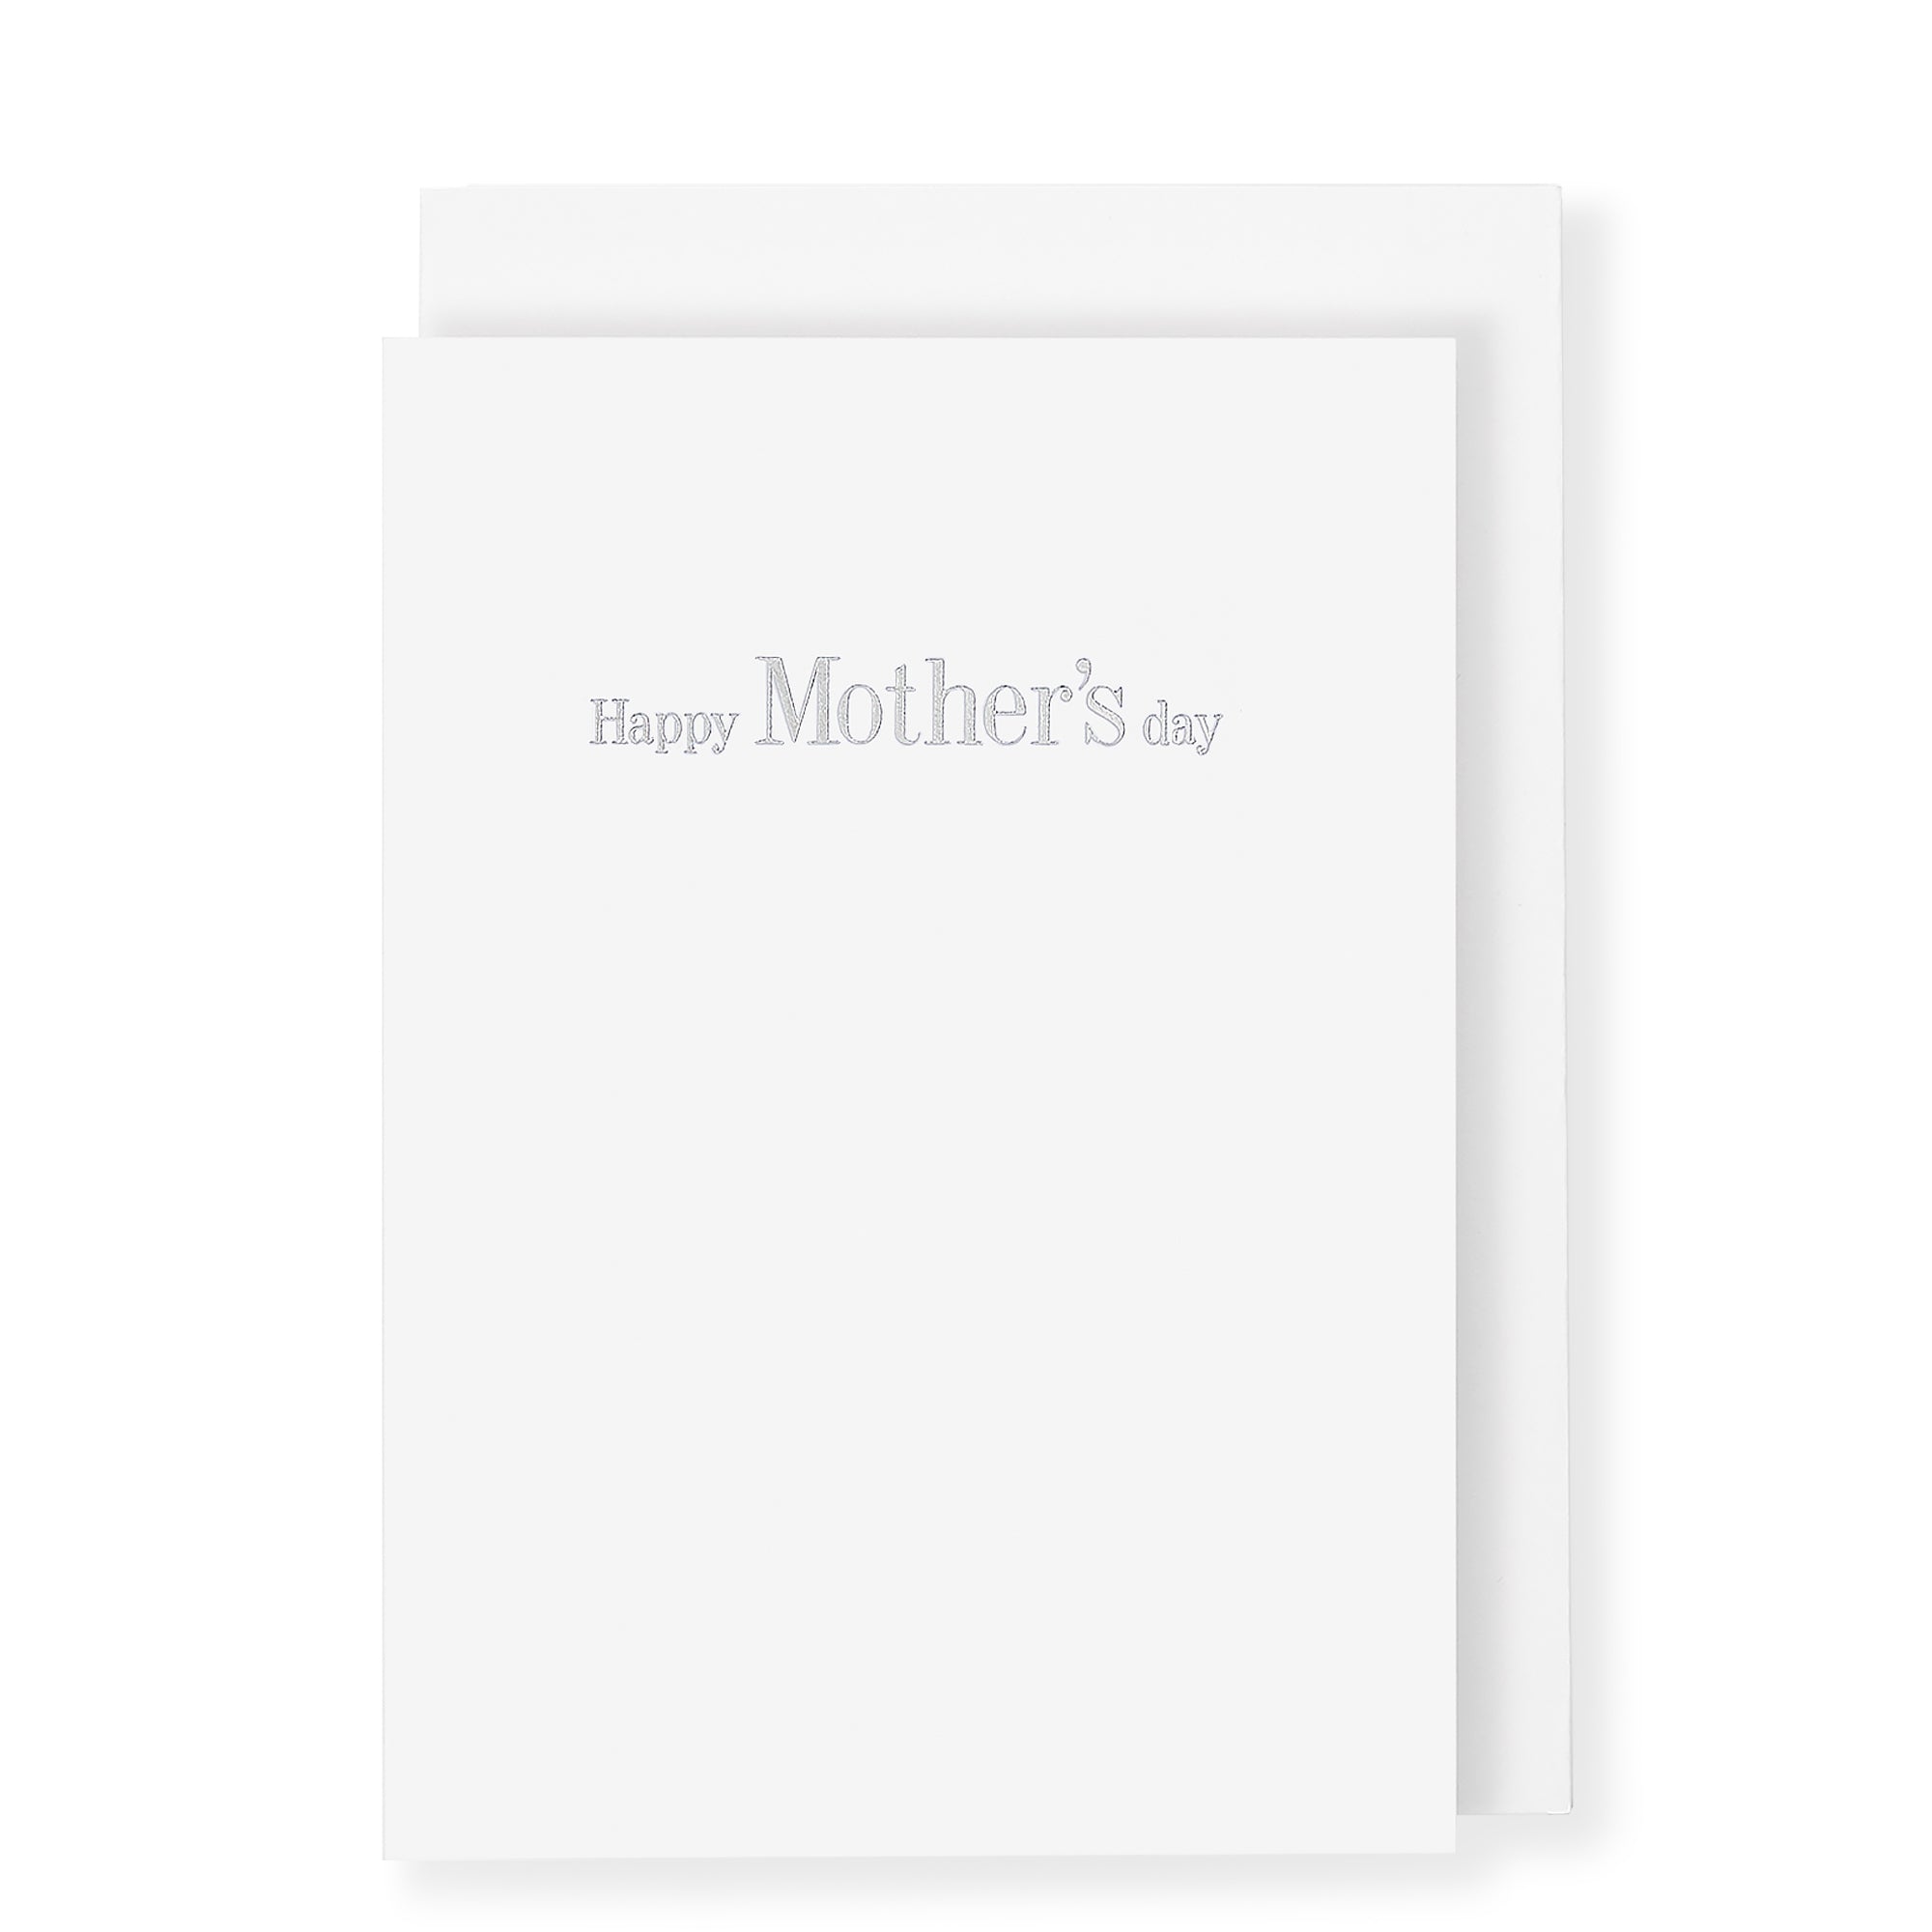 Happy Mother's Day Card, White